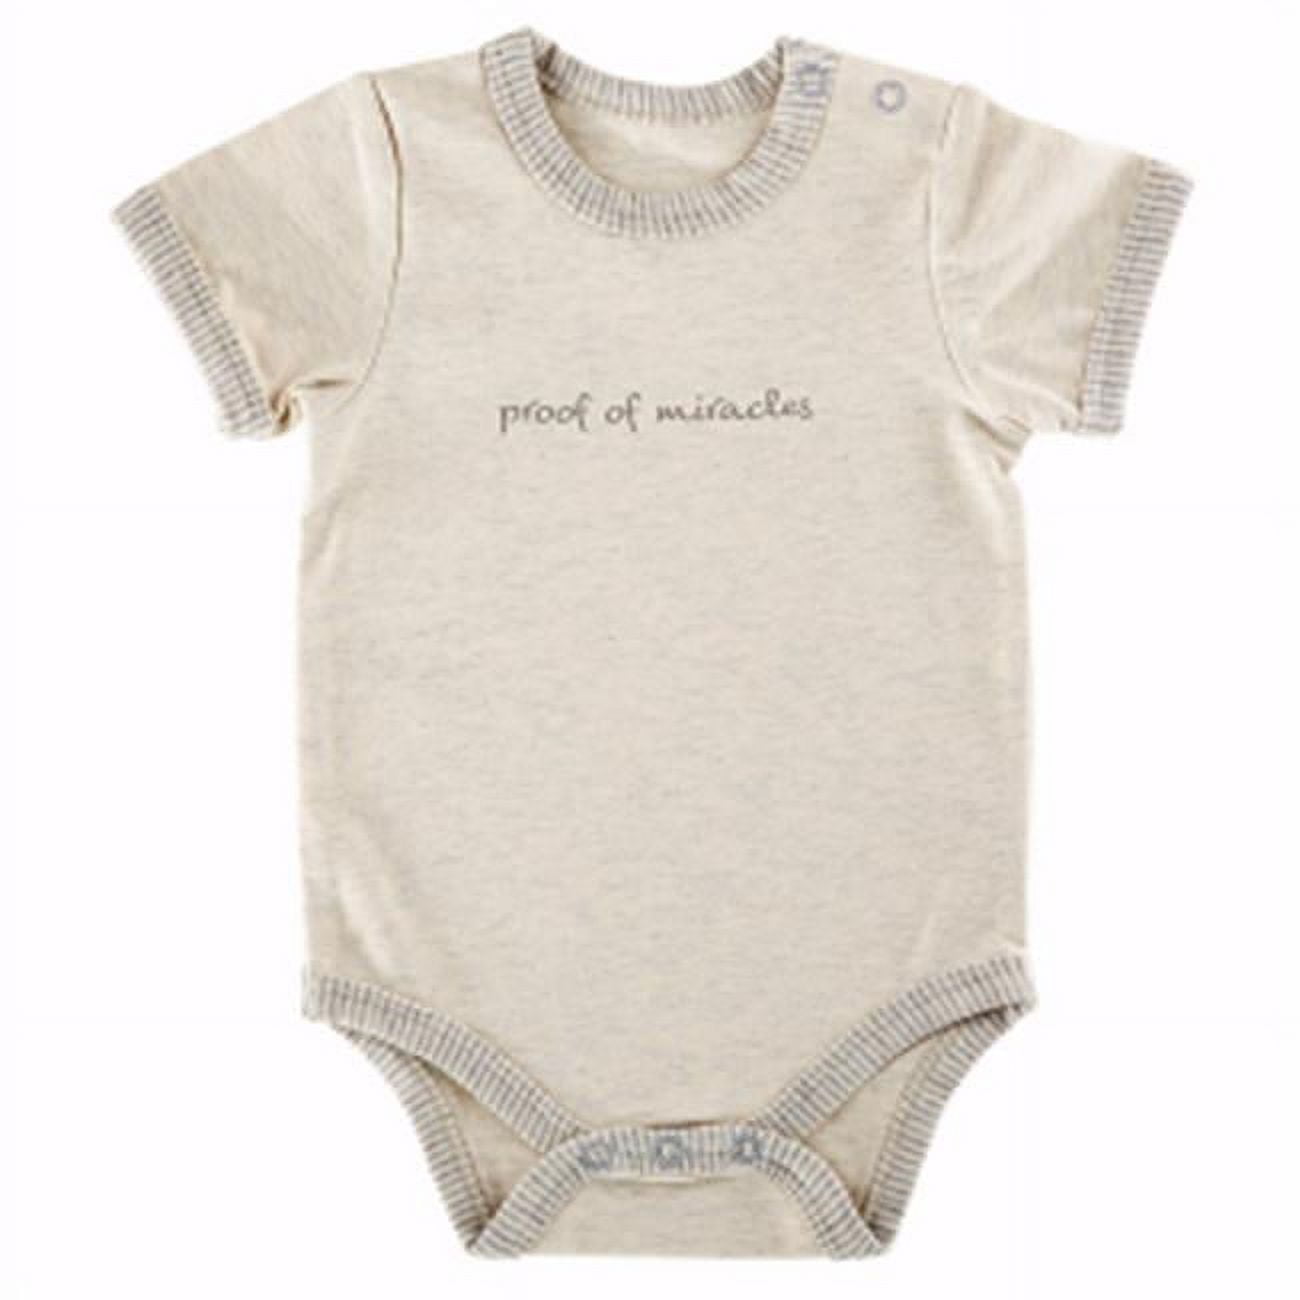 Picture of CB Gift 143188 Baby Snapshirt - Proof of MiraclesPack of 2